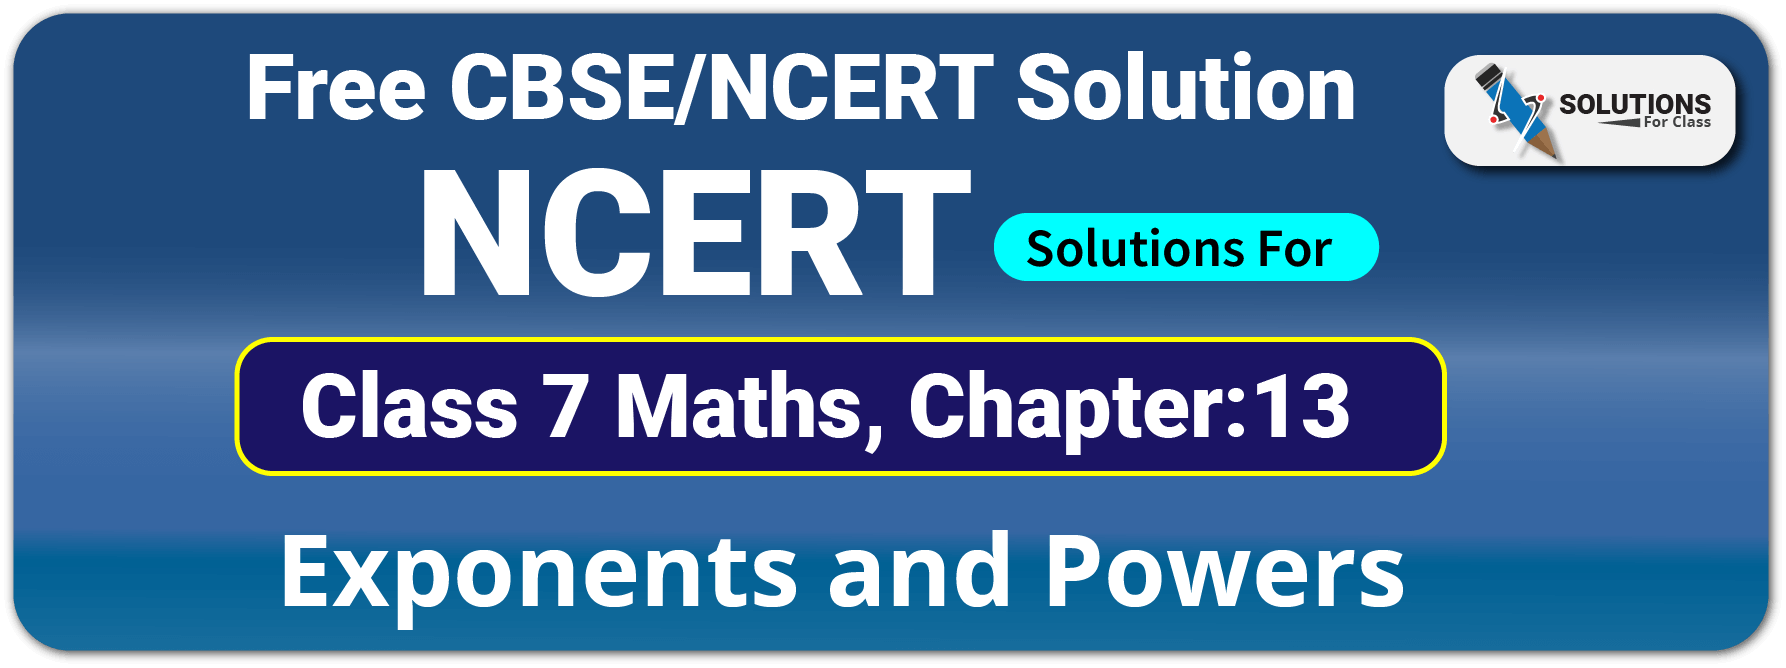 NCERT Solutions For Class 7 Maths Chapter 13 Exponents and Powers